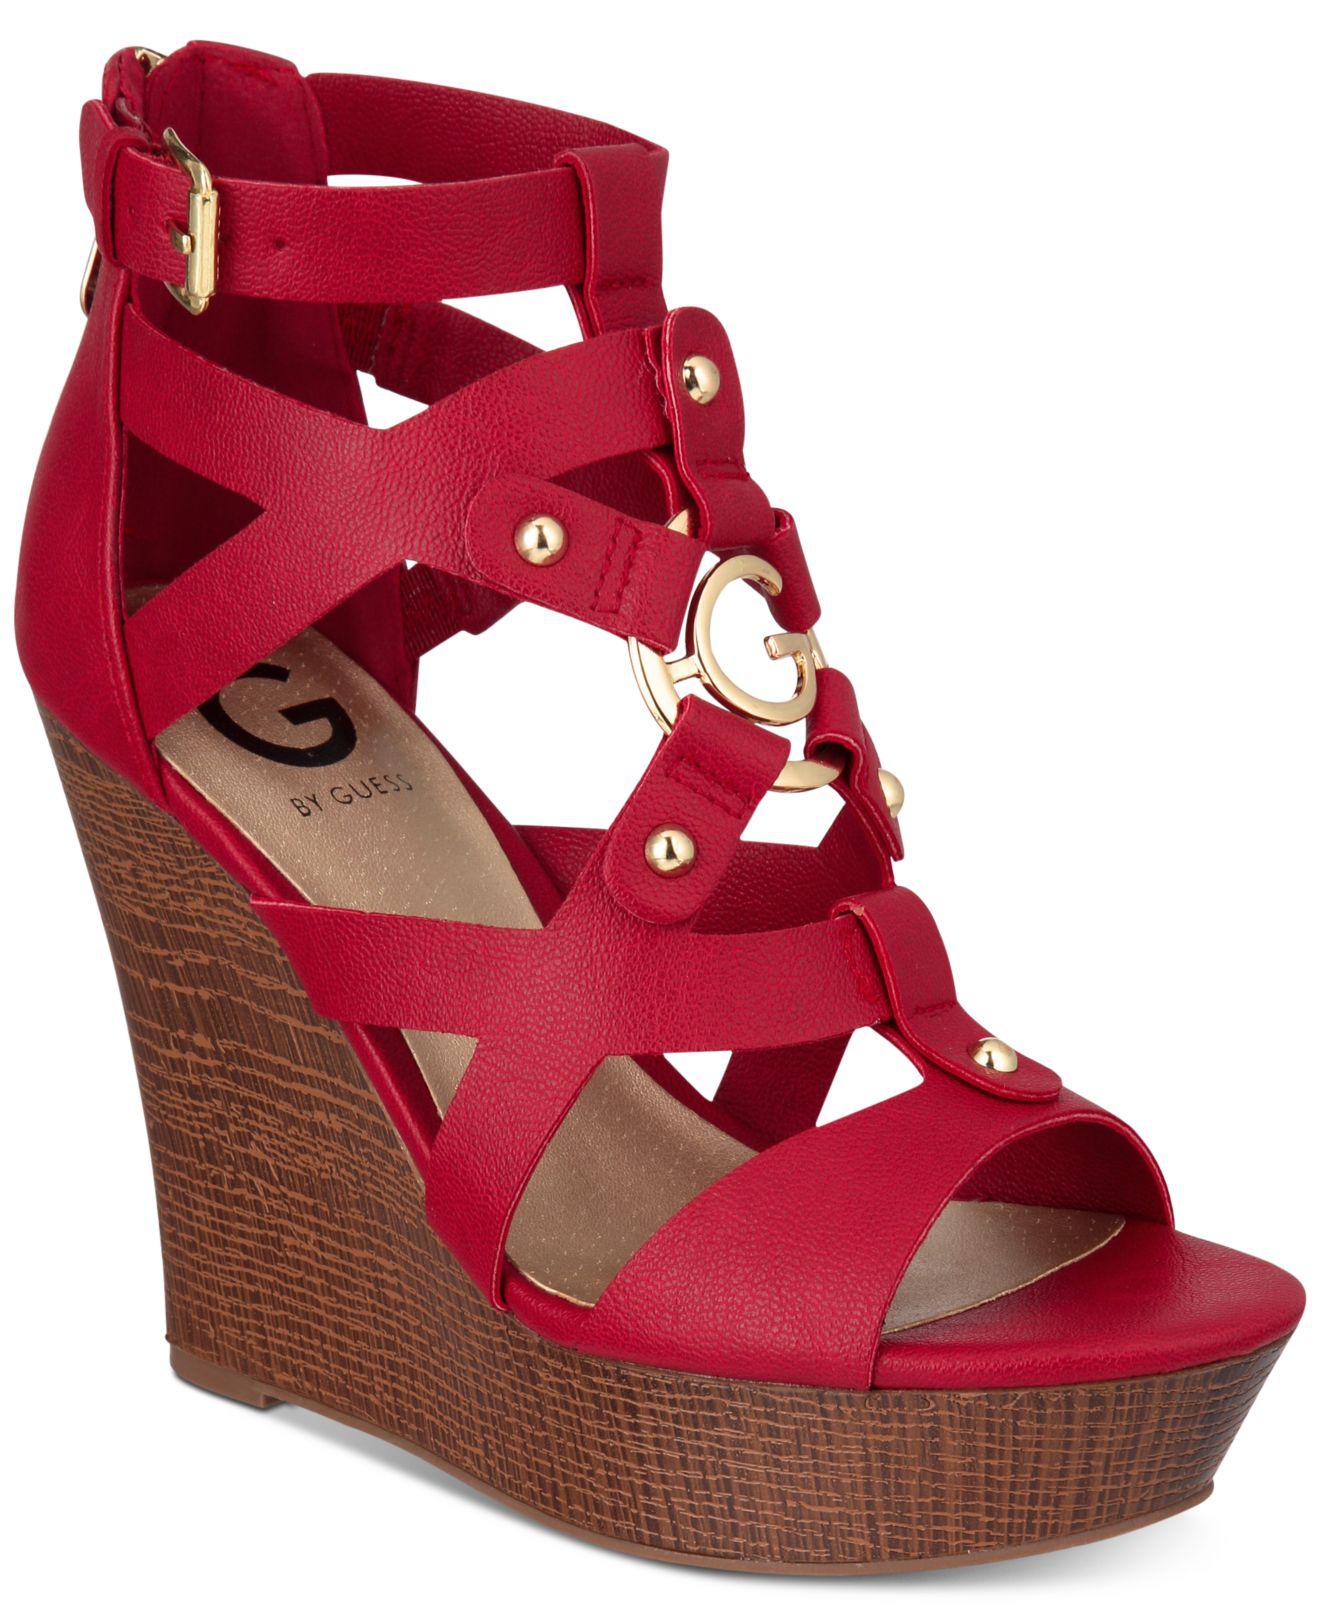 G by Guess Dodge Platform Wedge Sandals in Dark Red (Red) - Lyst